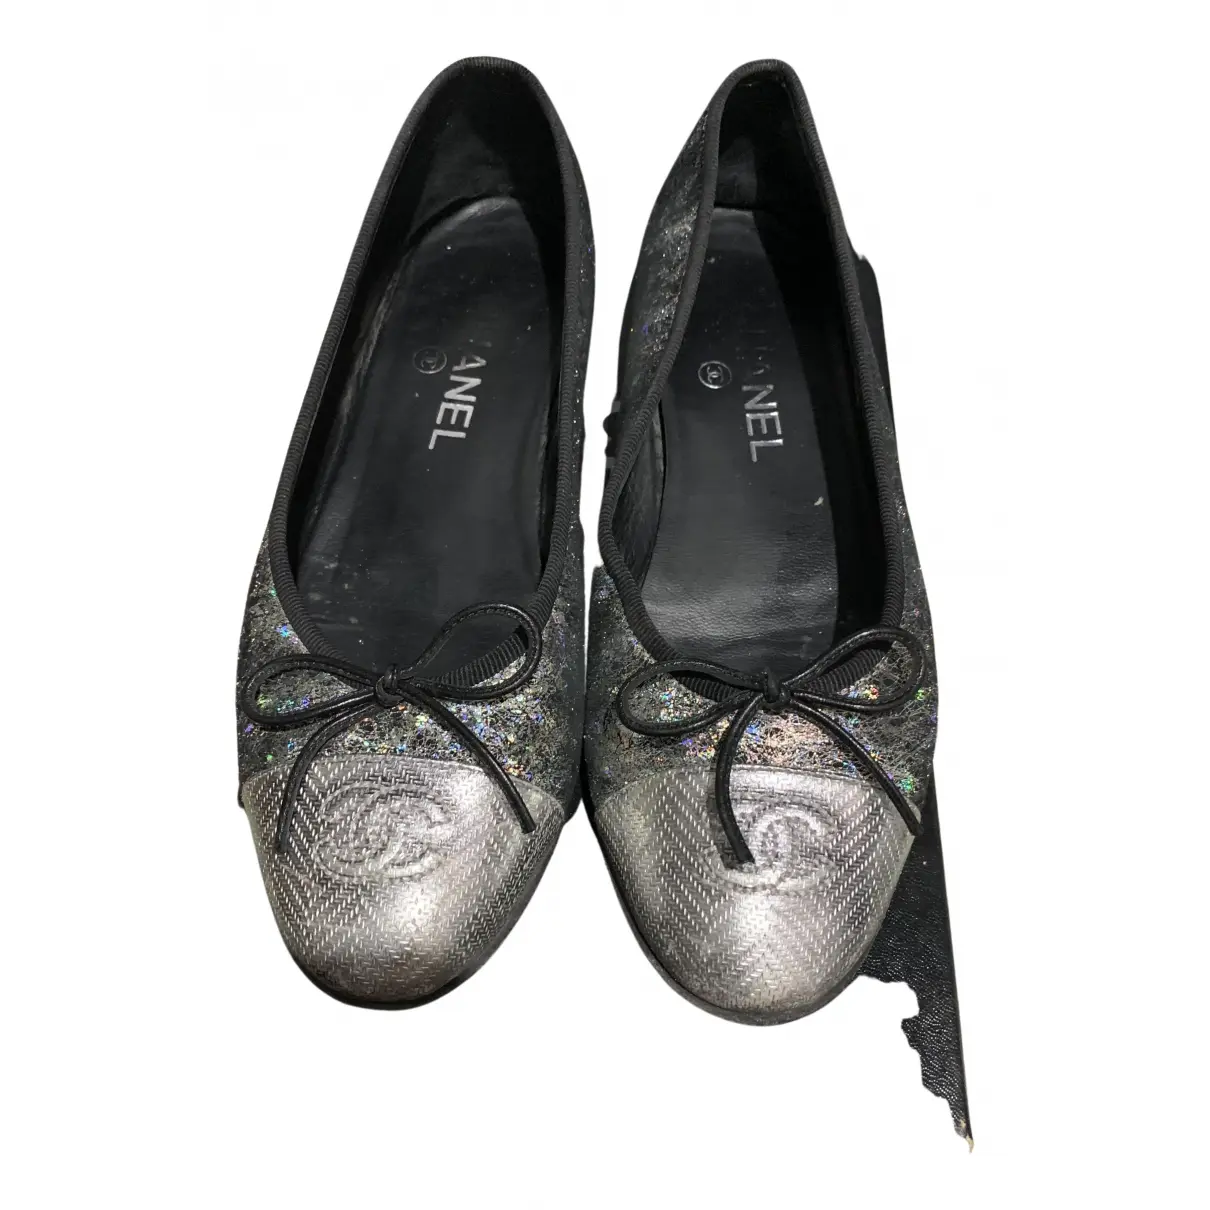 Buy Chanel Cambon leather ballet flats online